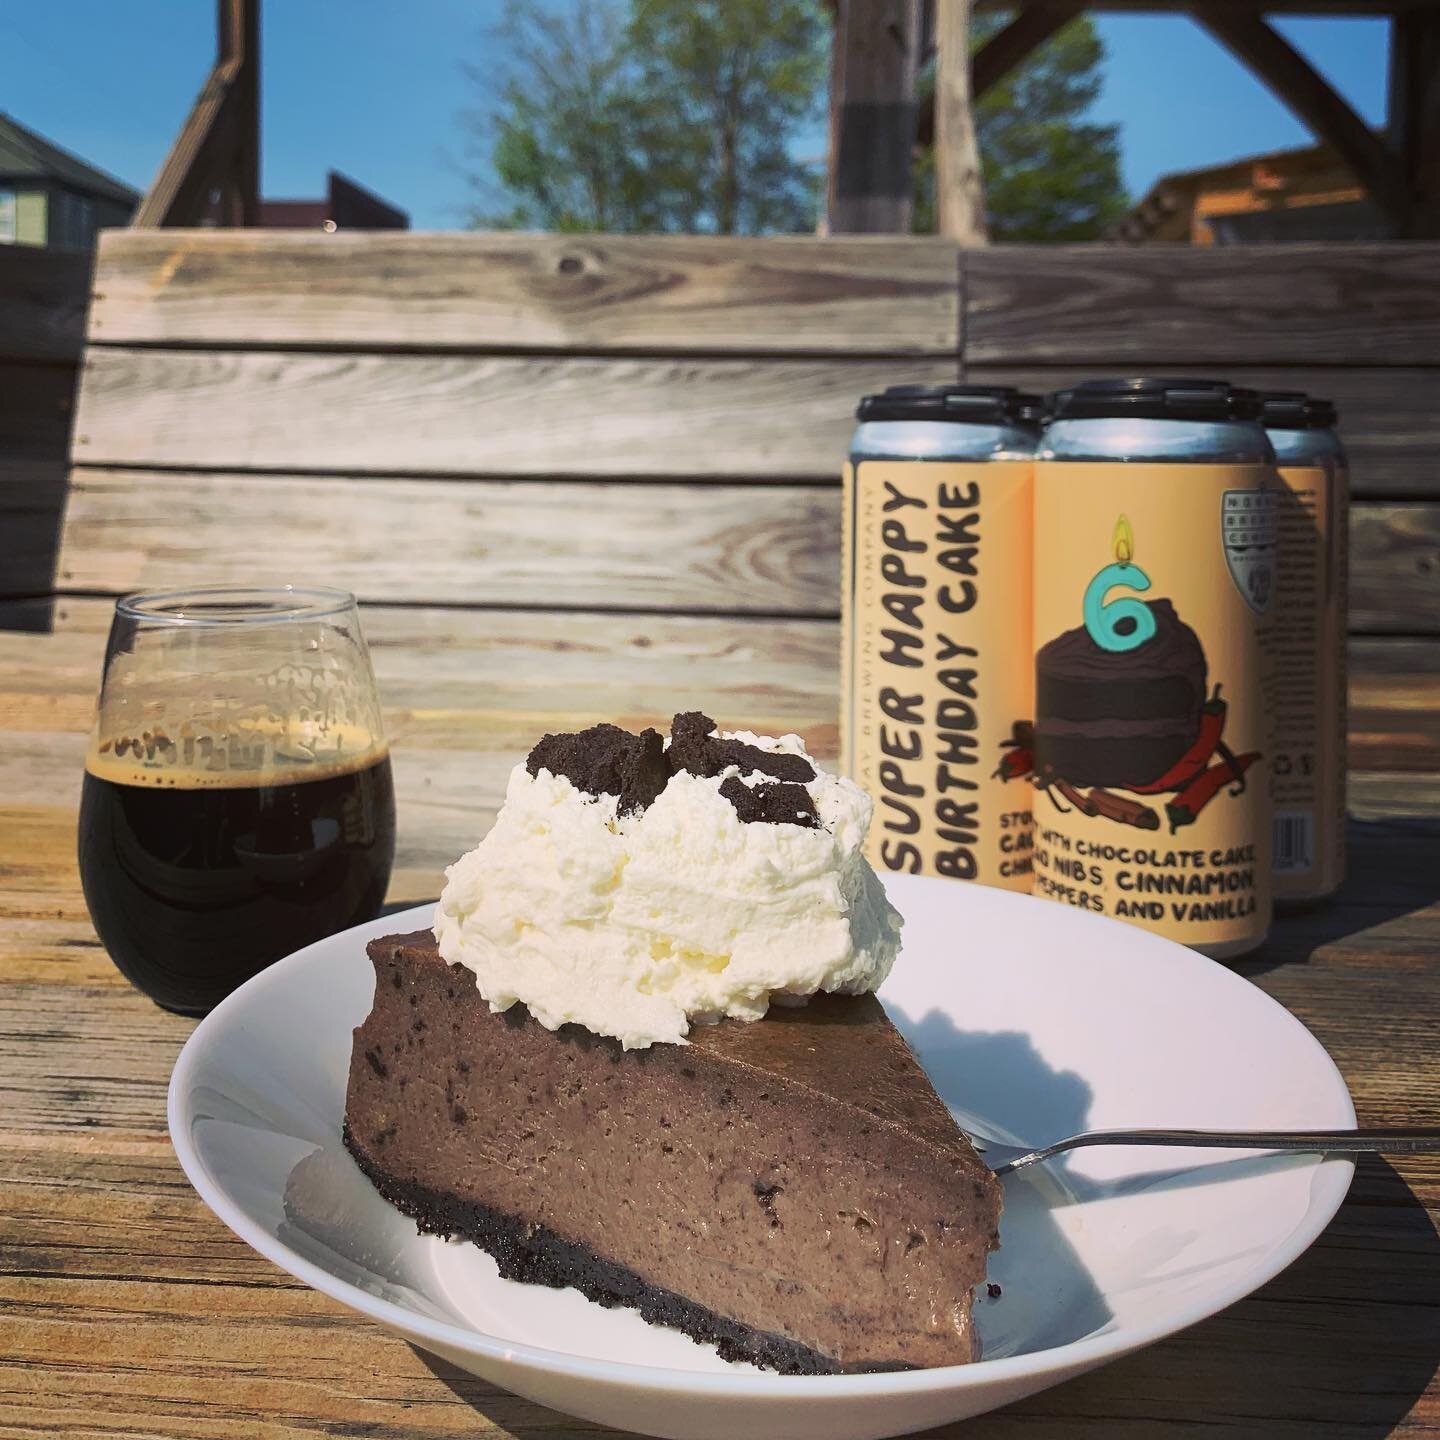 You know what pairs REALLY well with Super Happy Birthday Cake? This double chocolate cookies &amp; cream cheesecake!!! The rich cocoa &amp; vanilla notes in the beer meld perfectly with the instense chocolate cookie flavors... We'll be running this 